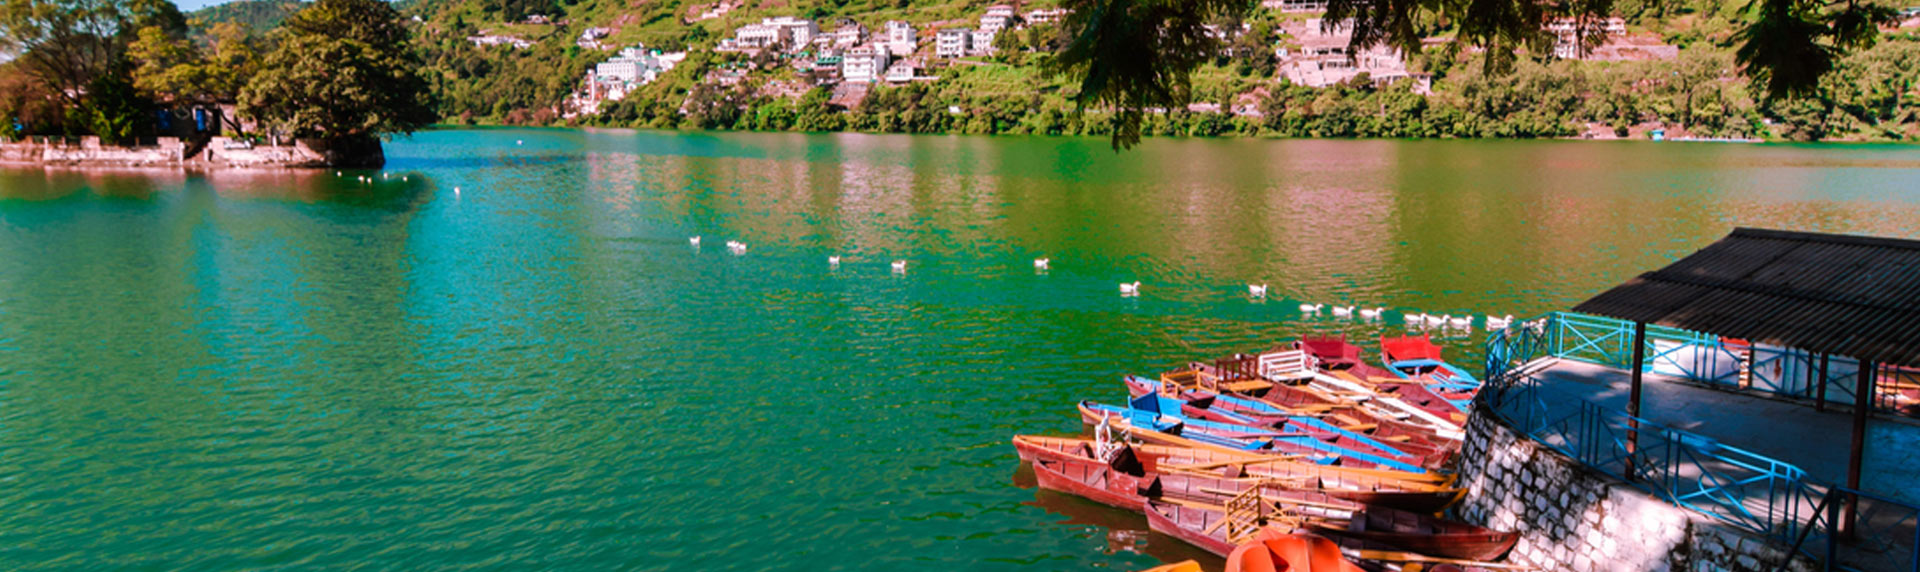 Boating in Bhimtal lake is one of the things to do in Uttarakhand with amazing Bhimtal sightseeing places